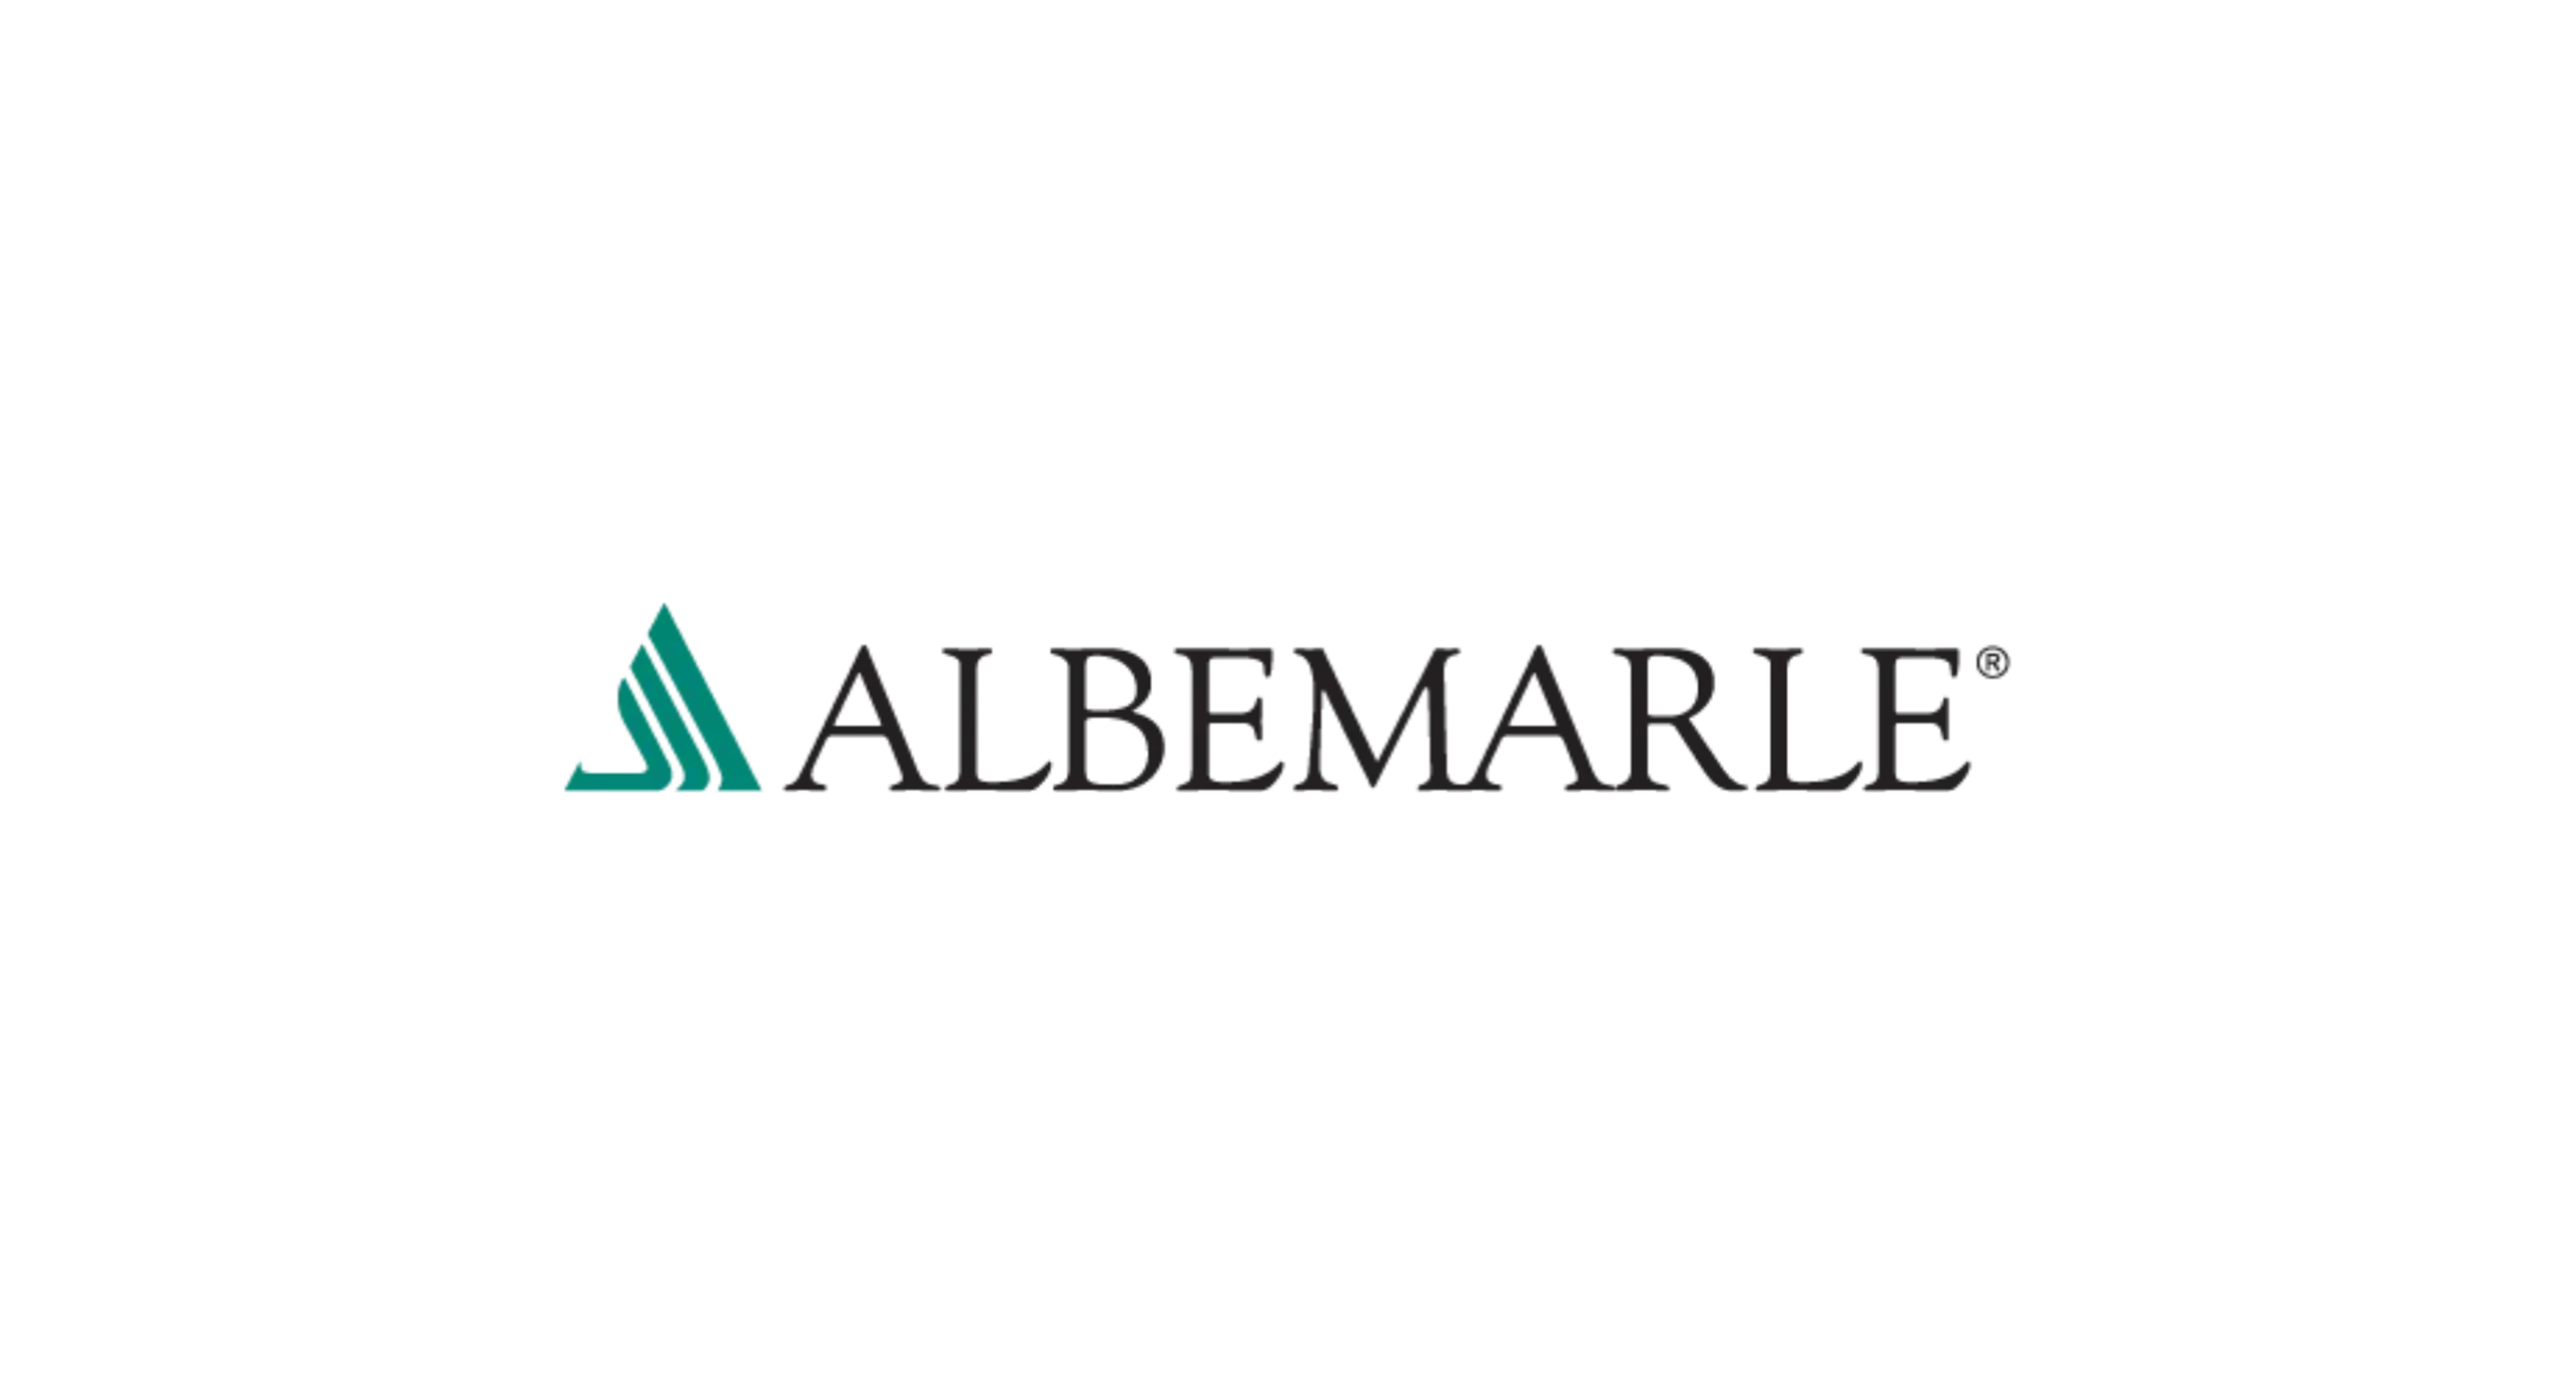 From Ignoring Red Flags To Paying Millions: Chemicals Company Albemarle Settles Bribery Probe